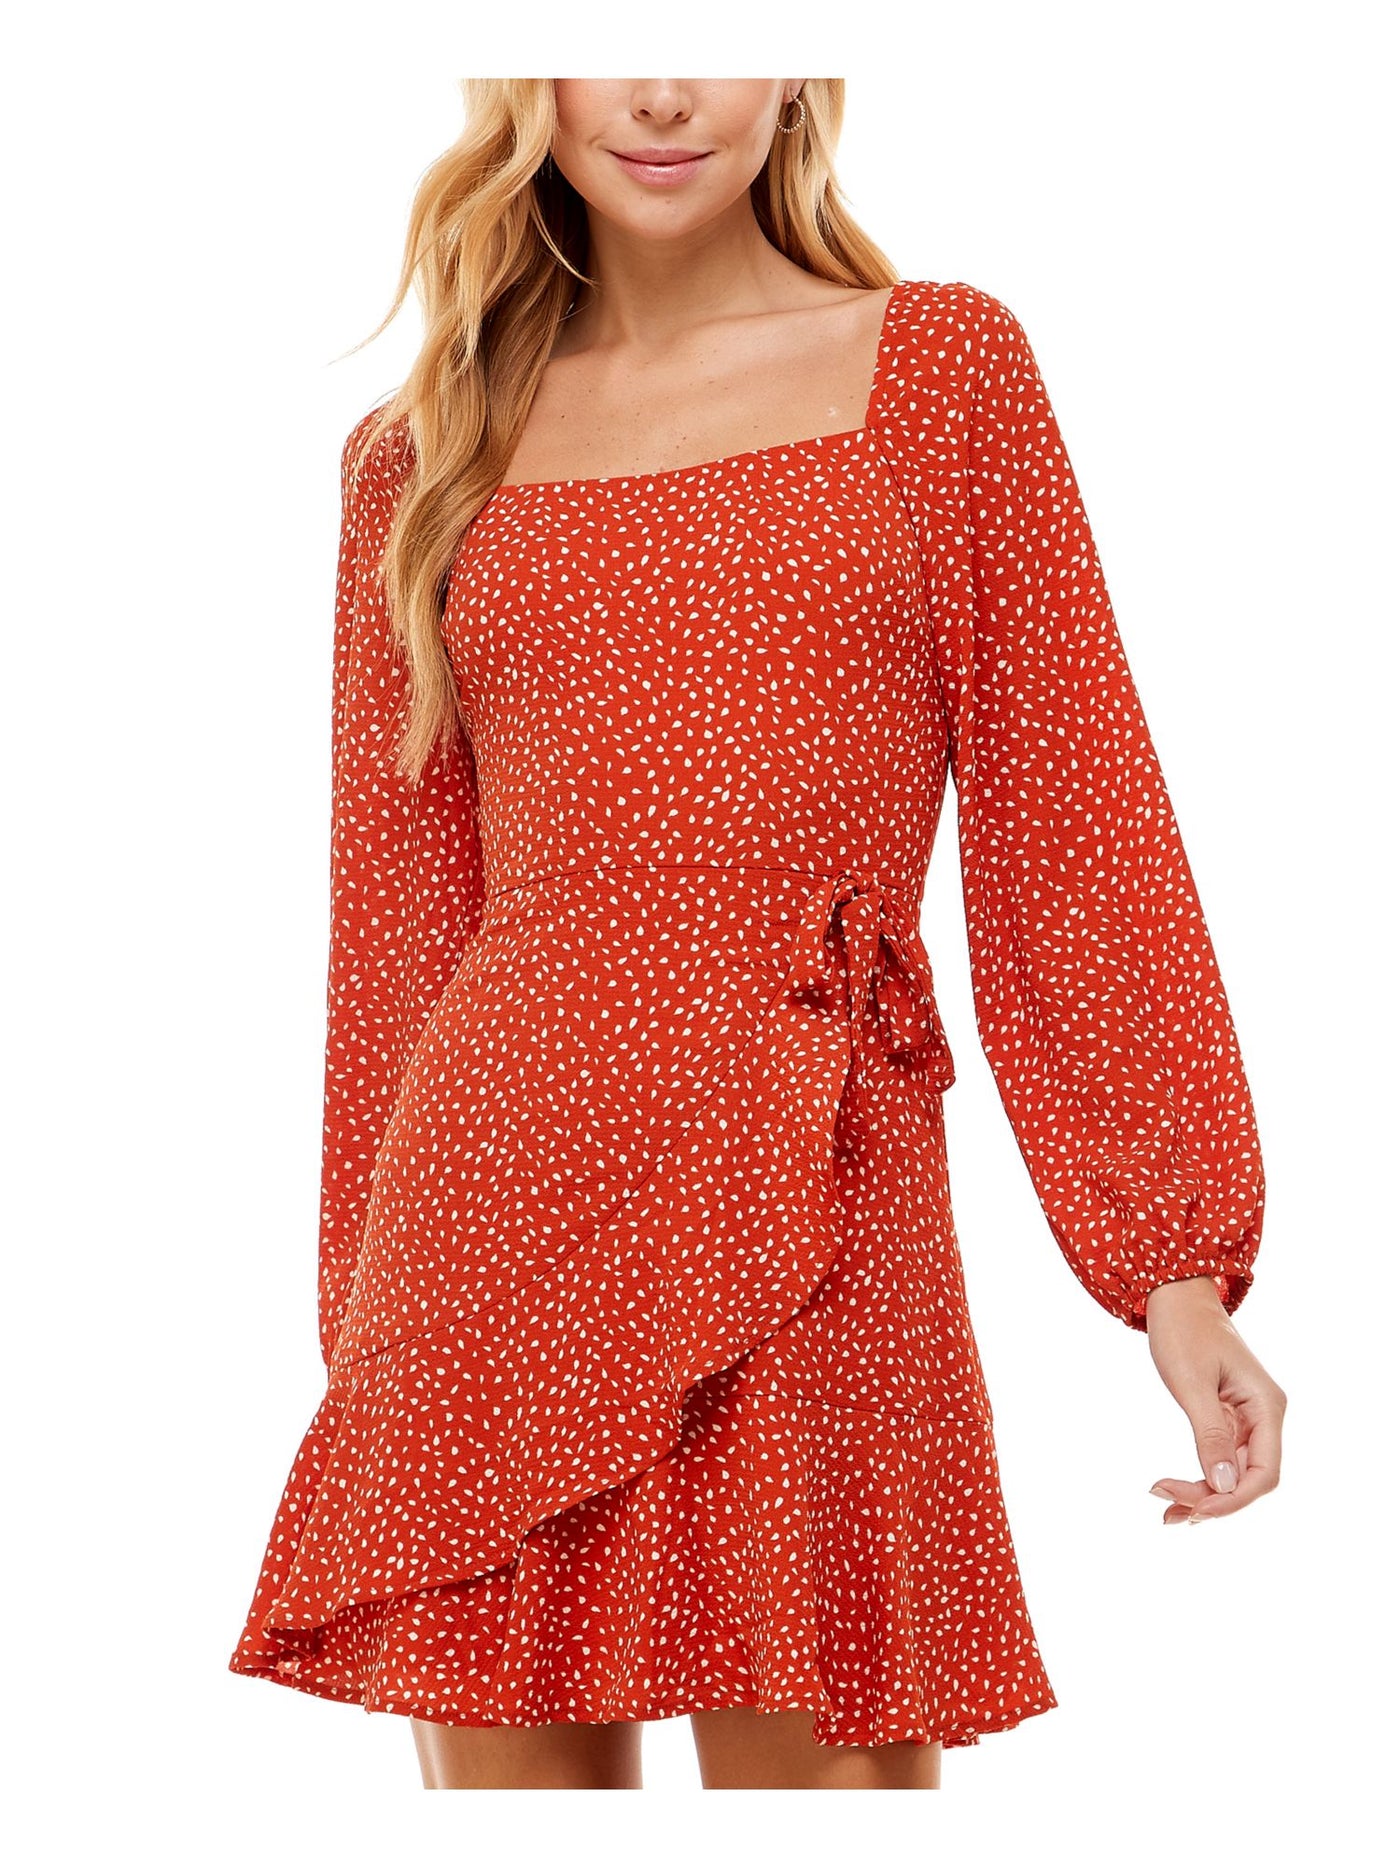 CITY STUDIO Womens Orange Zippered Textured Side Tie Ruffled Lined Printed Blouson Sleeve Square Neck Short Party Fit + Flare Dress Juniors 11